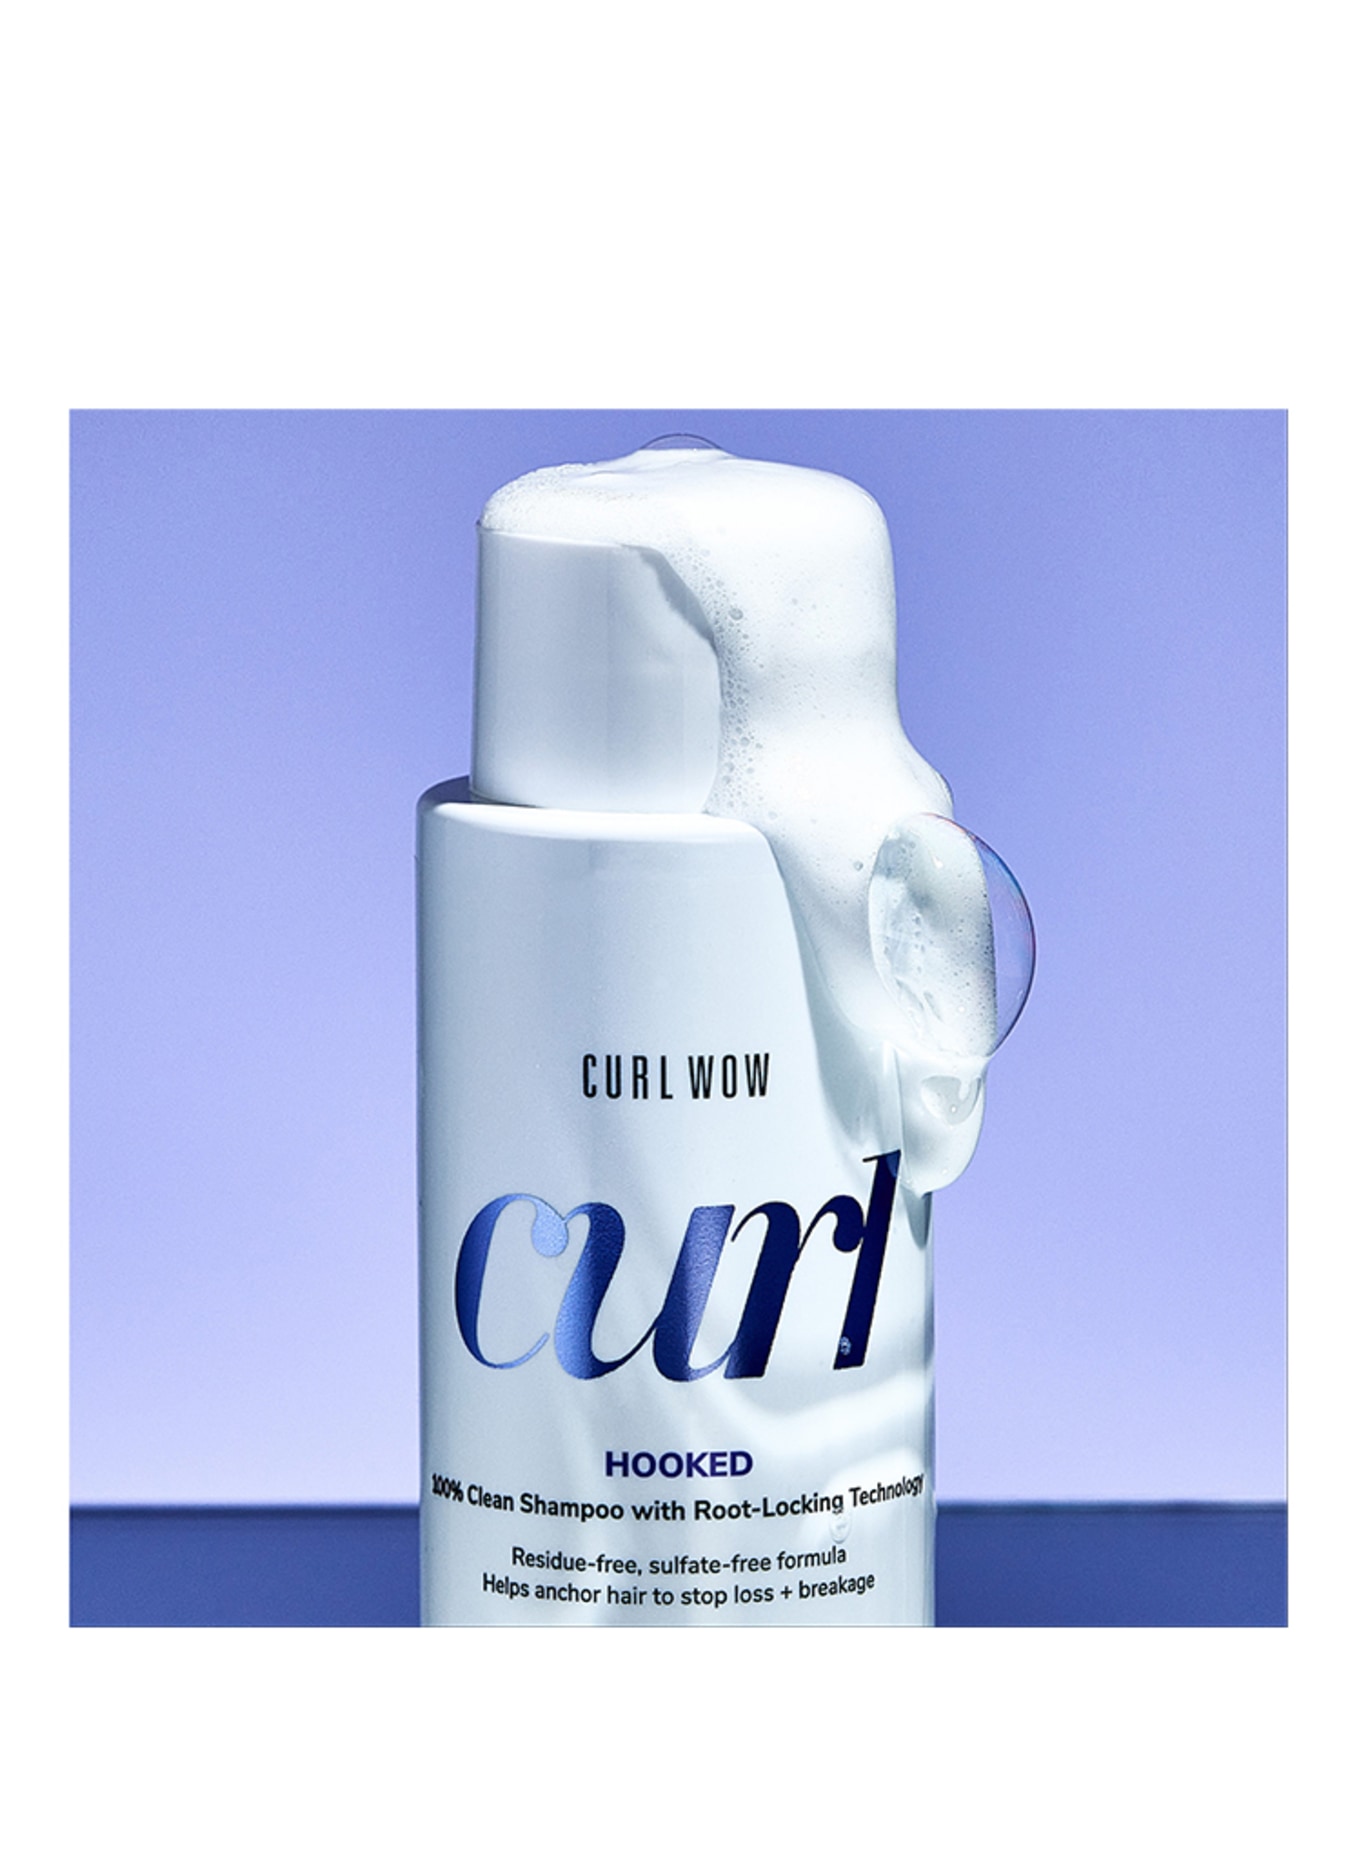 COLOR WOW CURL WOW HOOKED CLEAN SHAMPOO (Obrázek 2)